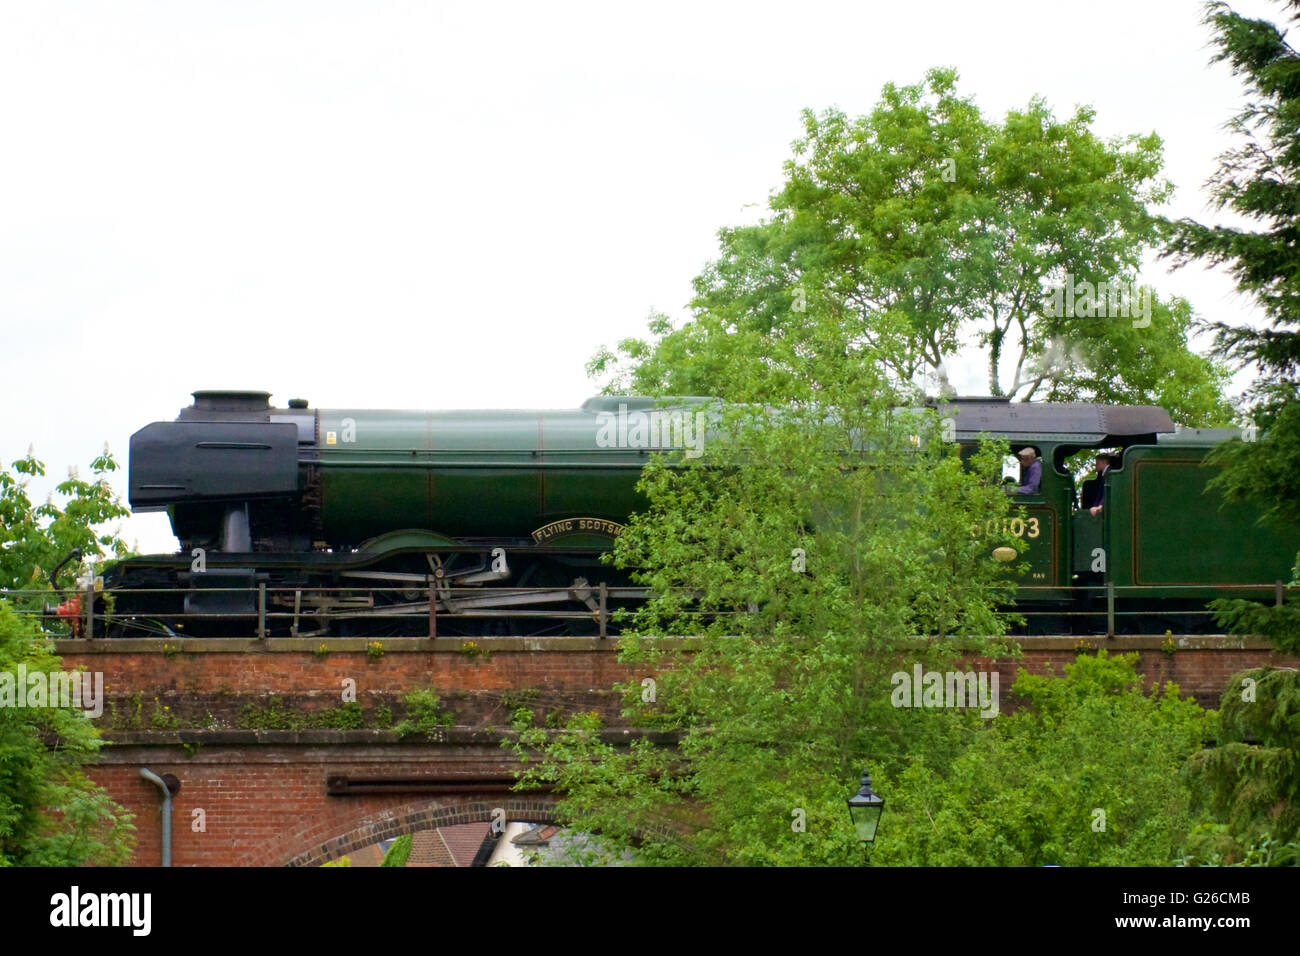 The Flying Scotsman 60103 Cathedrals Express crosses Nutley Lane Bridge as it steams through the Surrey Hills at Reigate, Surrey. 1428hrs Wednesday 25th May 2016 en route to London Victoria. Photo: Credit: Lindsay Constable / Alamy Live News Stock Photo